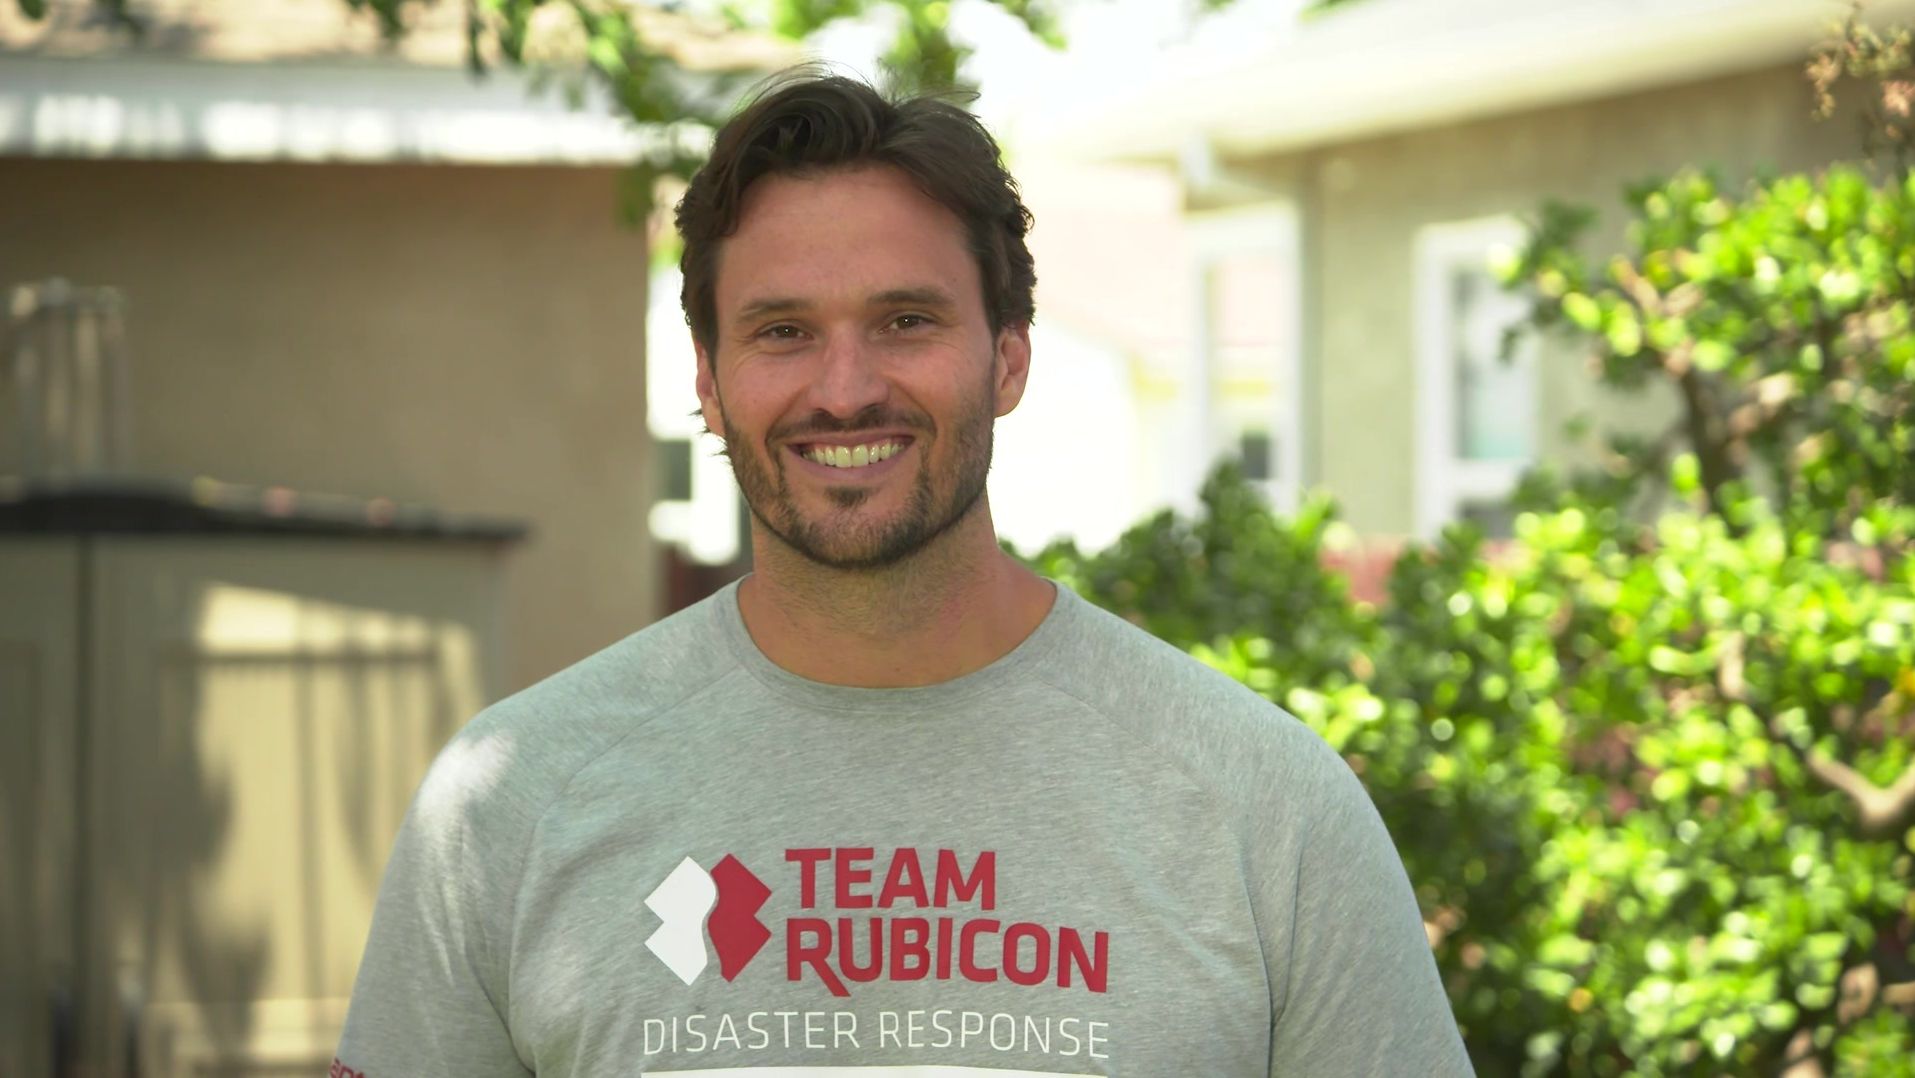 Jake Wood's Team Rubicon helps veterans put their experience to use in times of crisis.